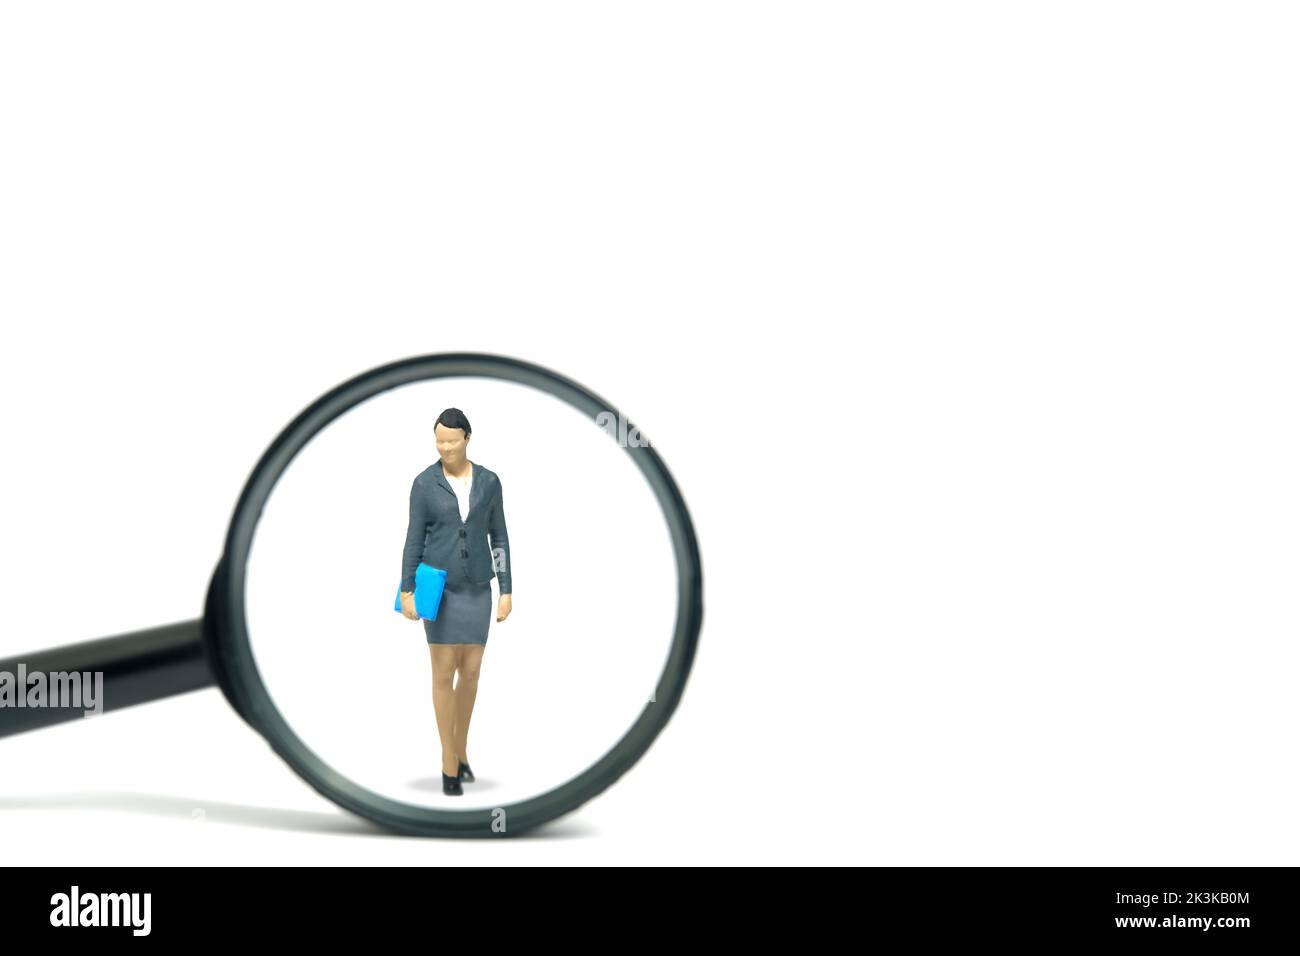 Miniature people toy figure photography. Women leader search. A businesswoman standing with magnifier glass. Isolated on white background. Image photo Stock Photo